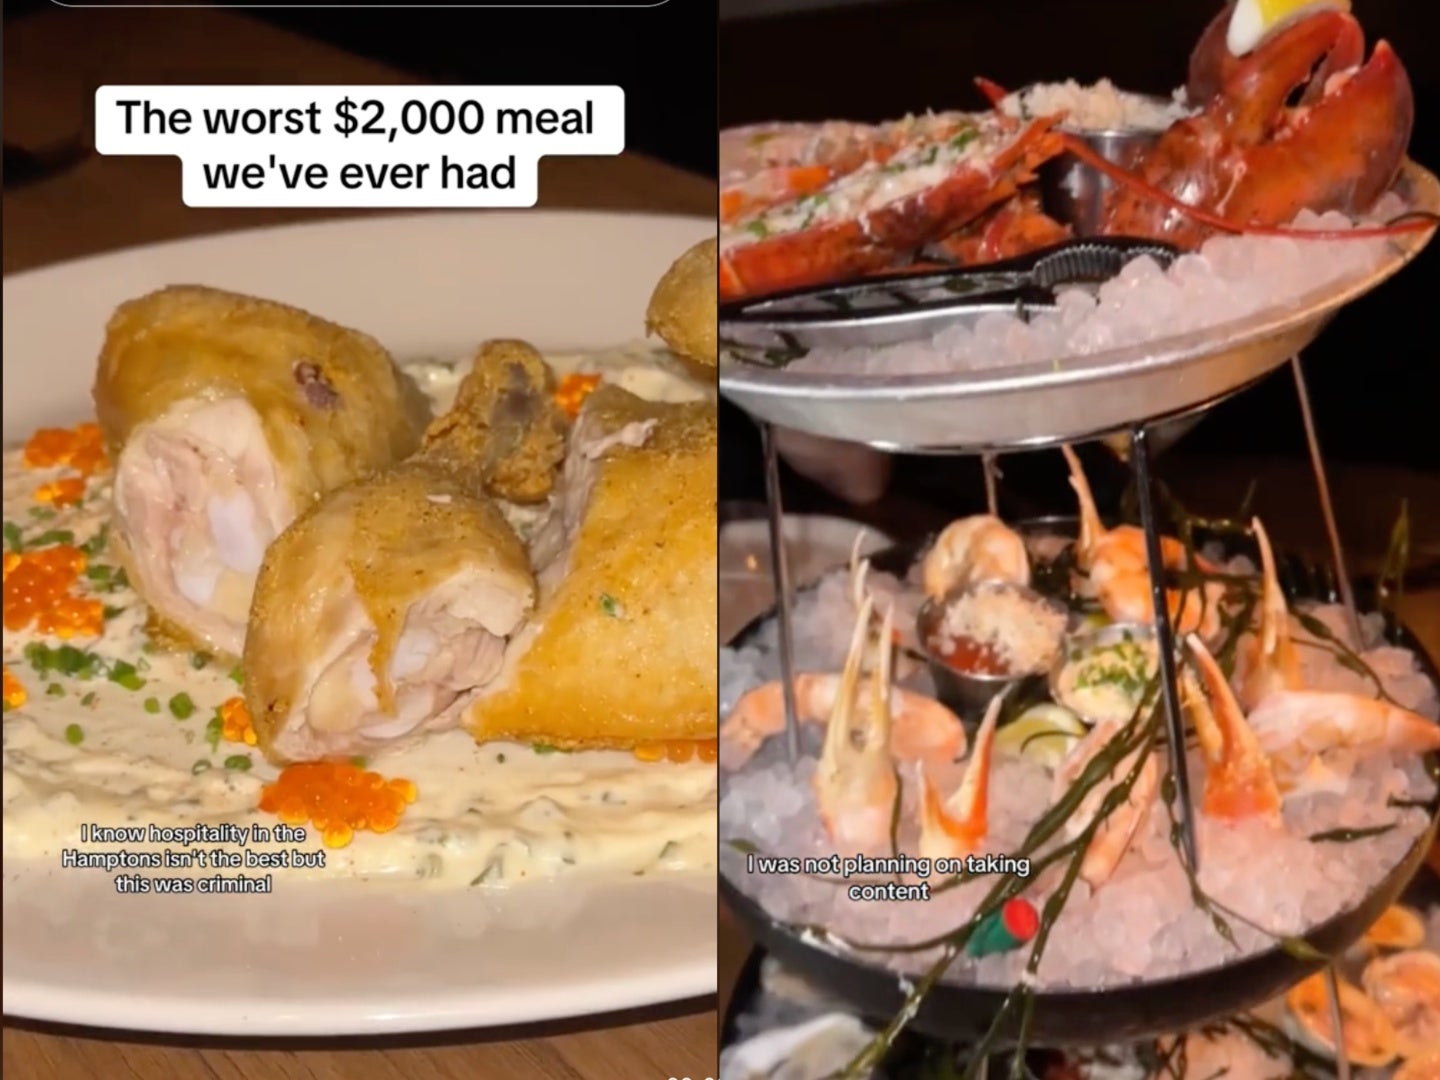 Hamptons restaurant reacts to influencers claiming they had the ‘worst’ dinner for $2,000